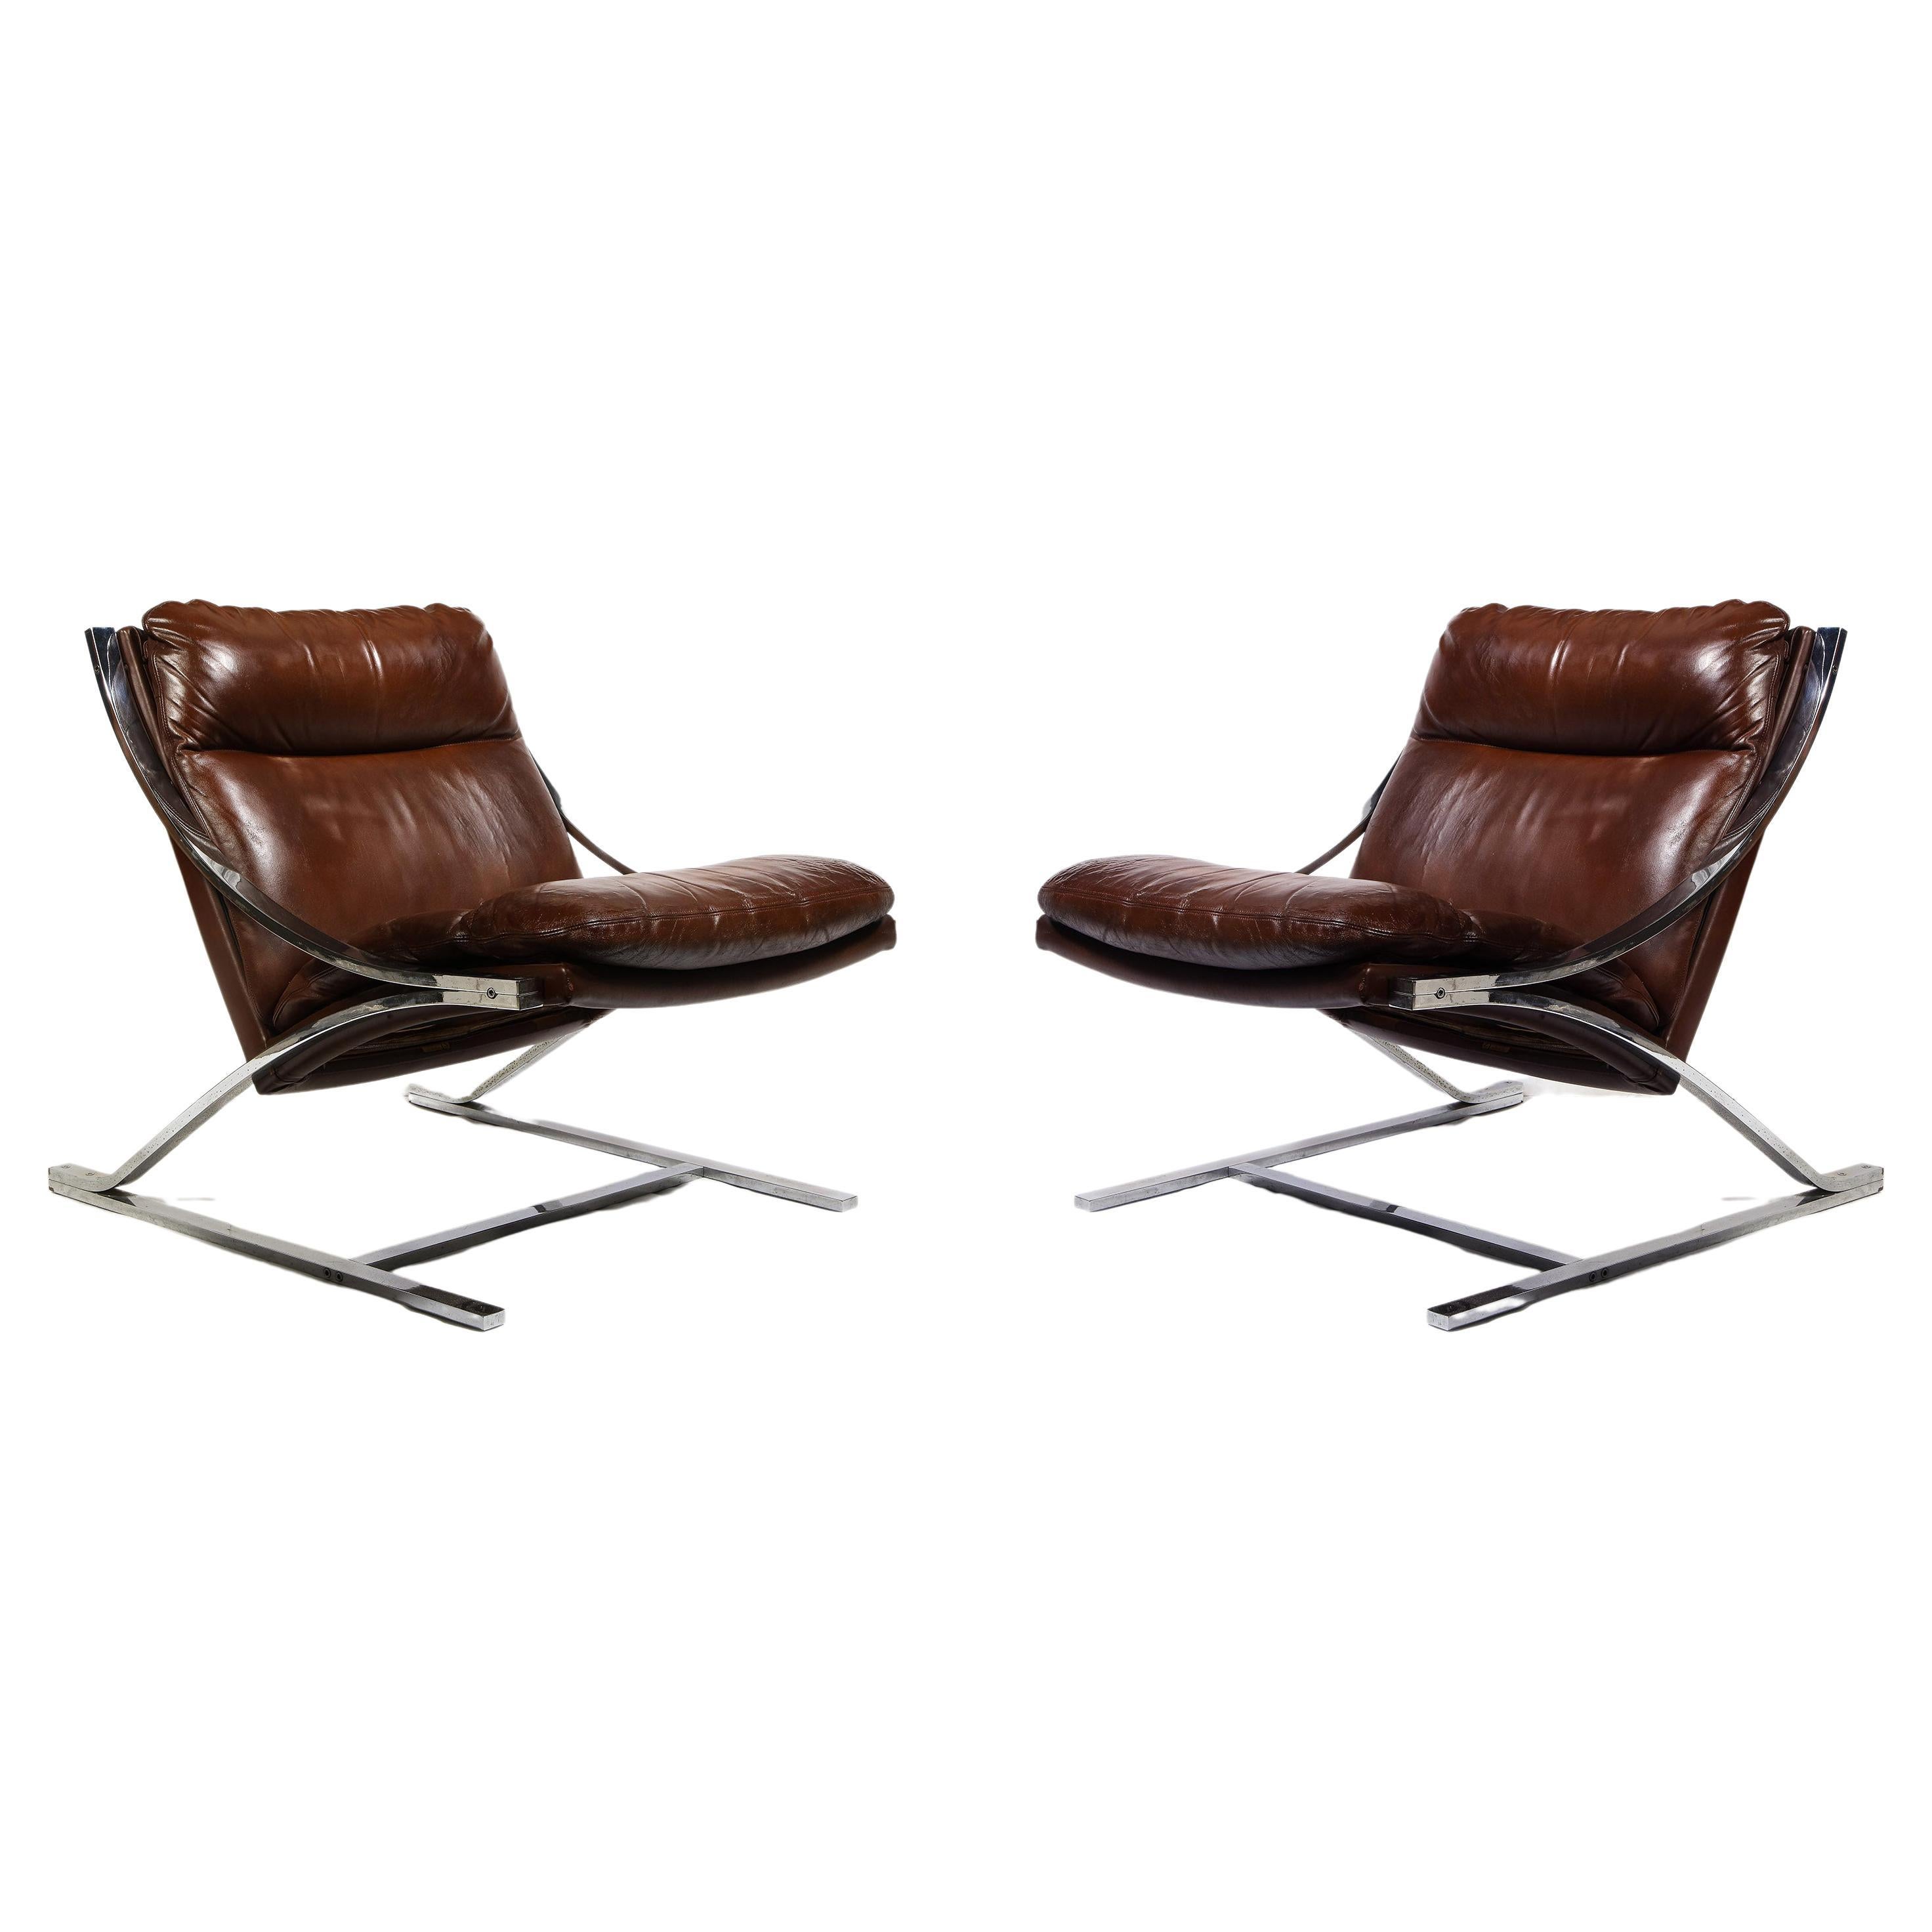 Pair of "Zeta" Lounge Chairs by Paul Tuttle